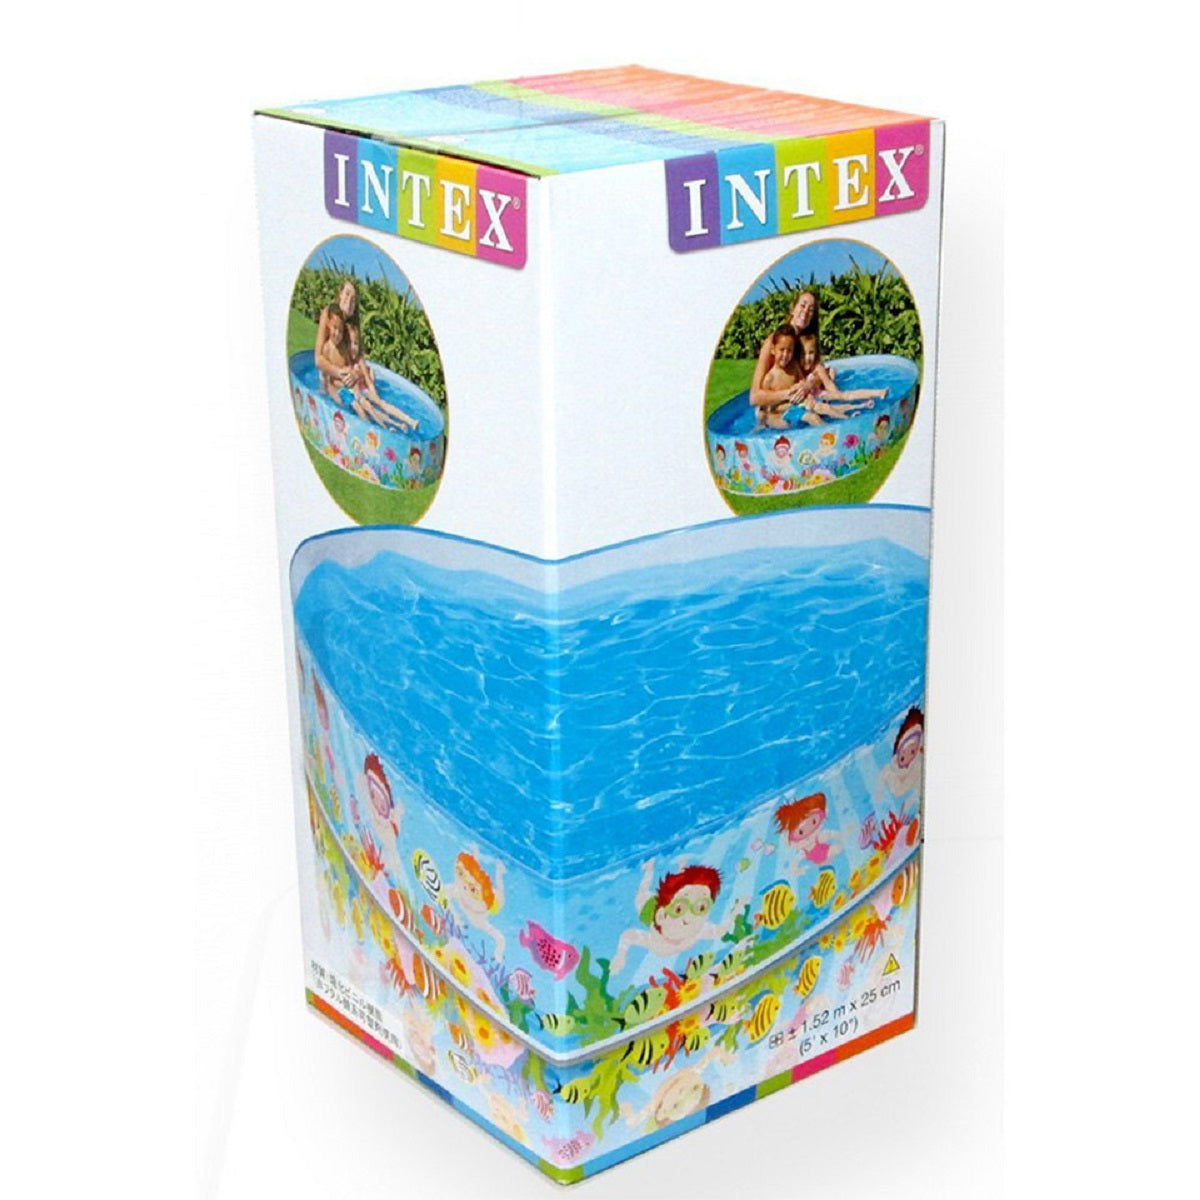 INTEX Snapset Withoud Air Swimming Pool 